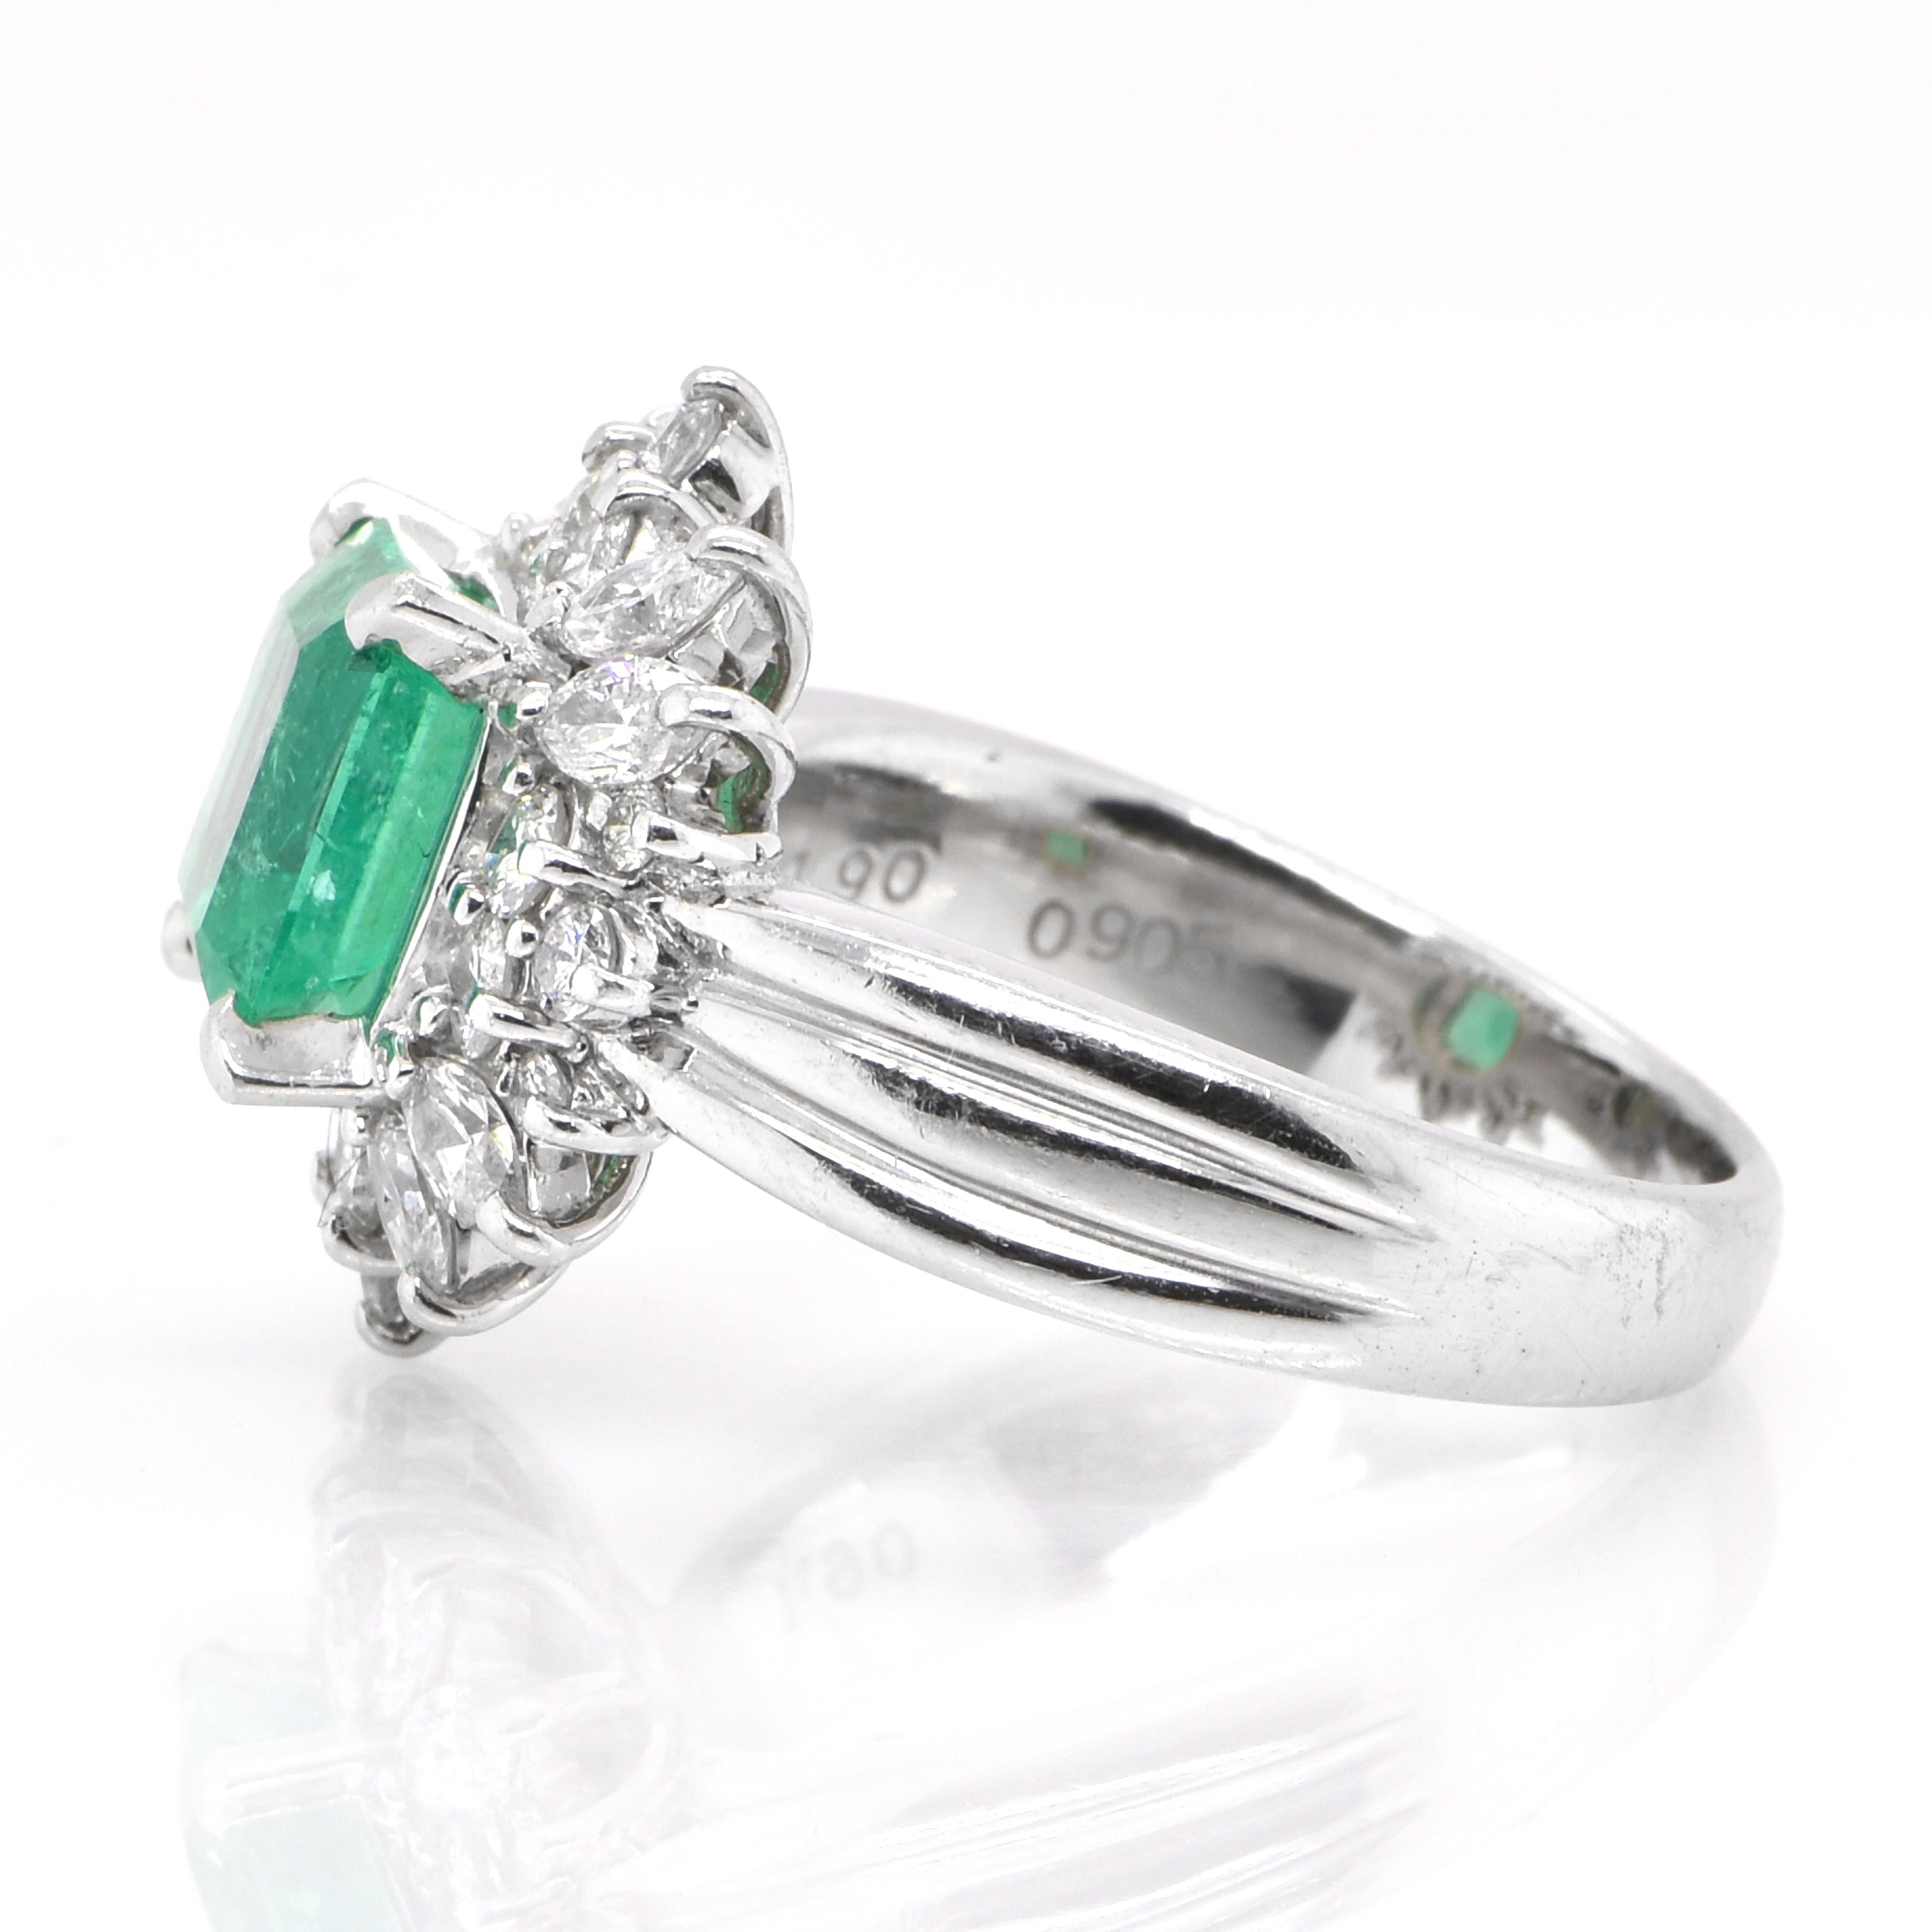 Emerald Cut 1.90 Carat Natural Emerald and Diamond Cocktail Ring Set in Platinum For Sale